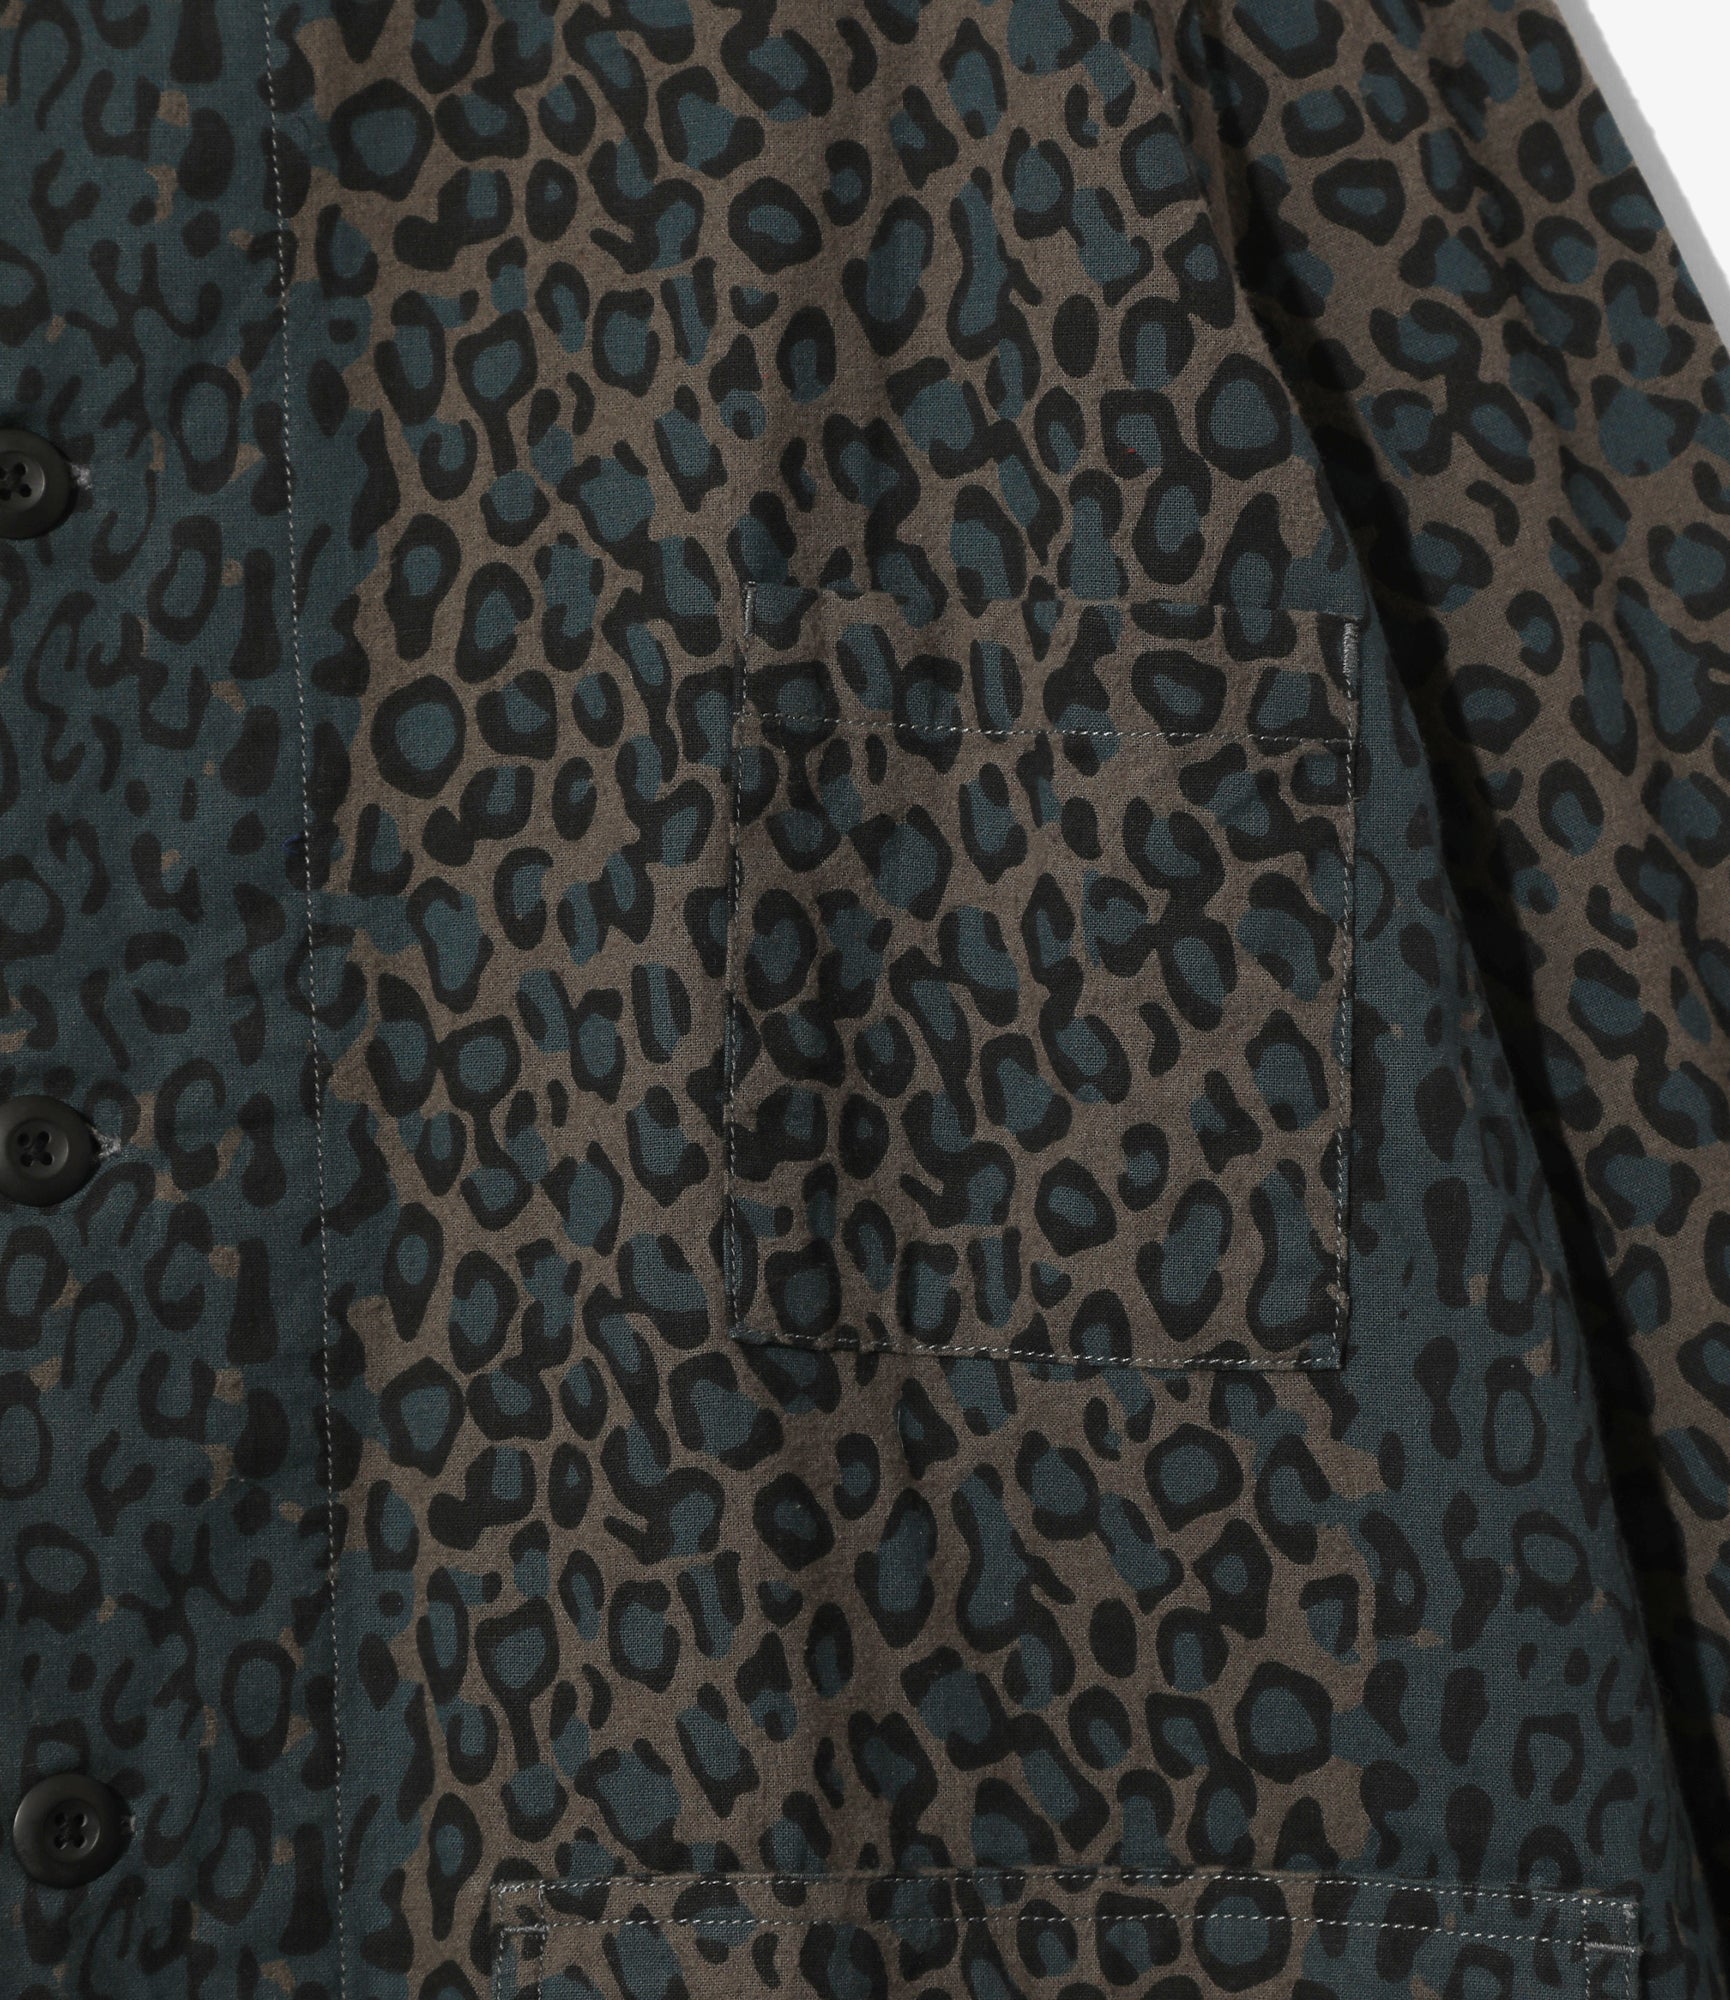 Hunting Shirt - Leopard - Flannel Cloth / Printed